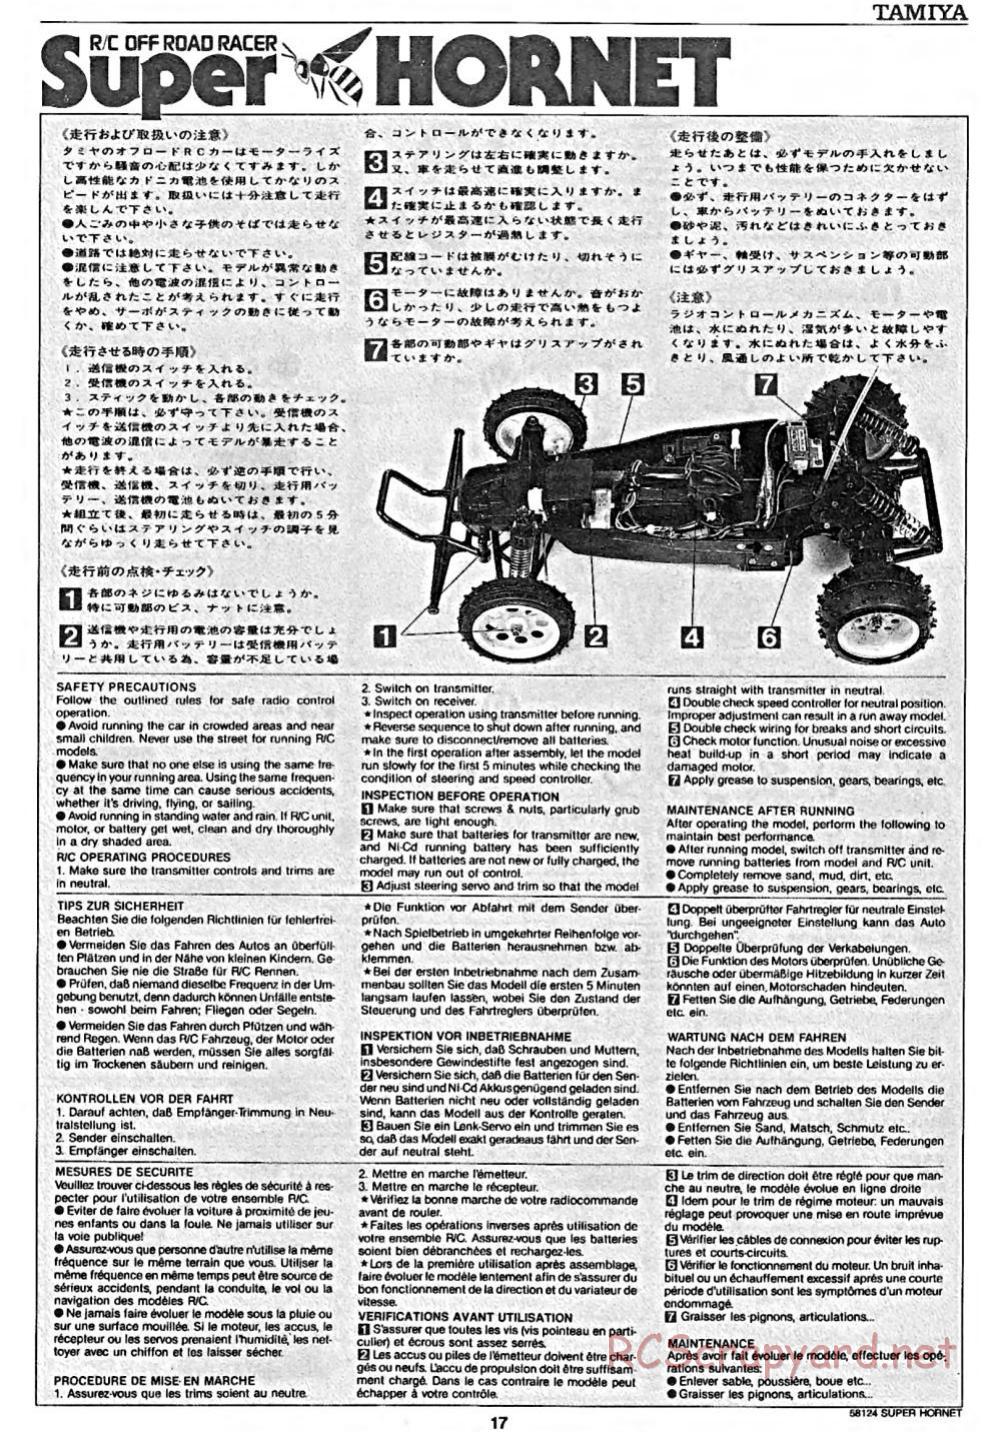 Tamiya - Super Hornet Chassis - Manual - Page 17